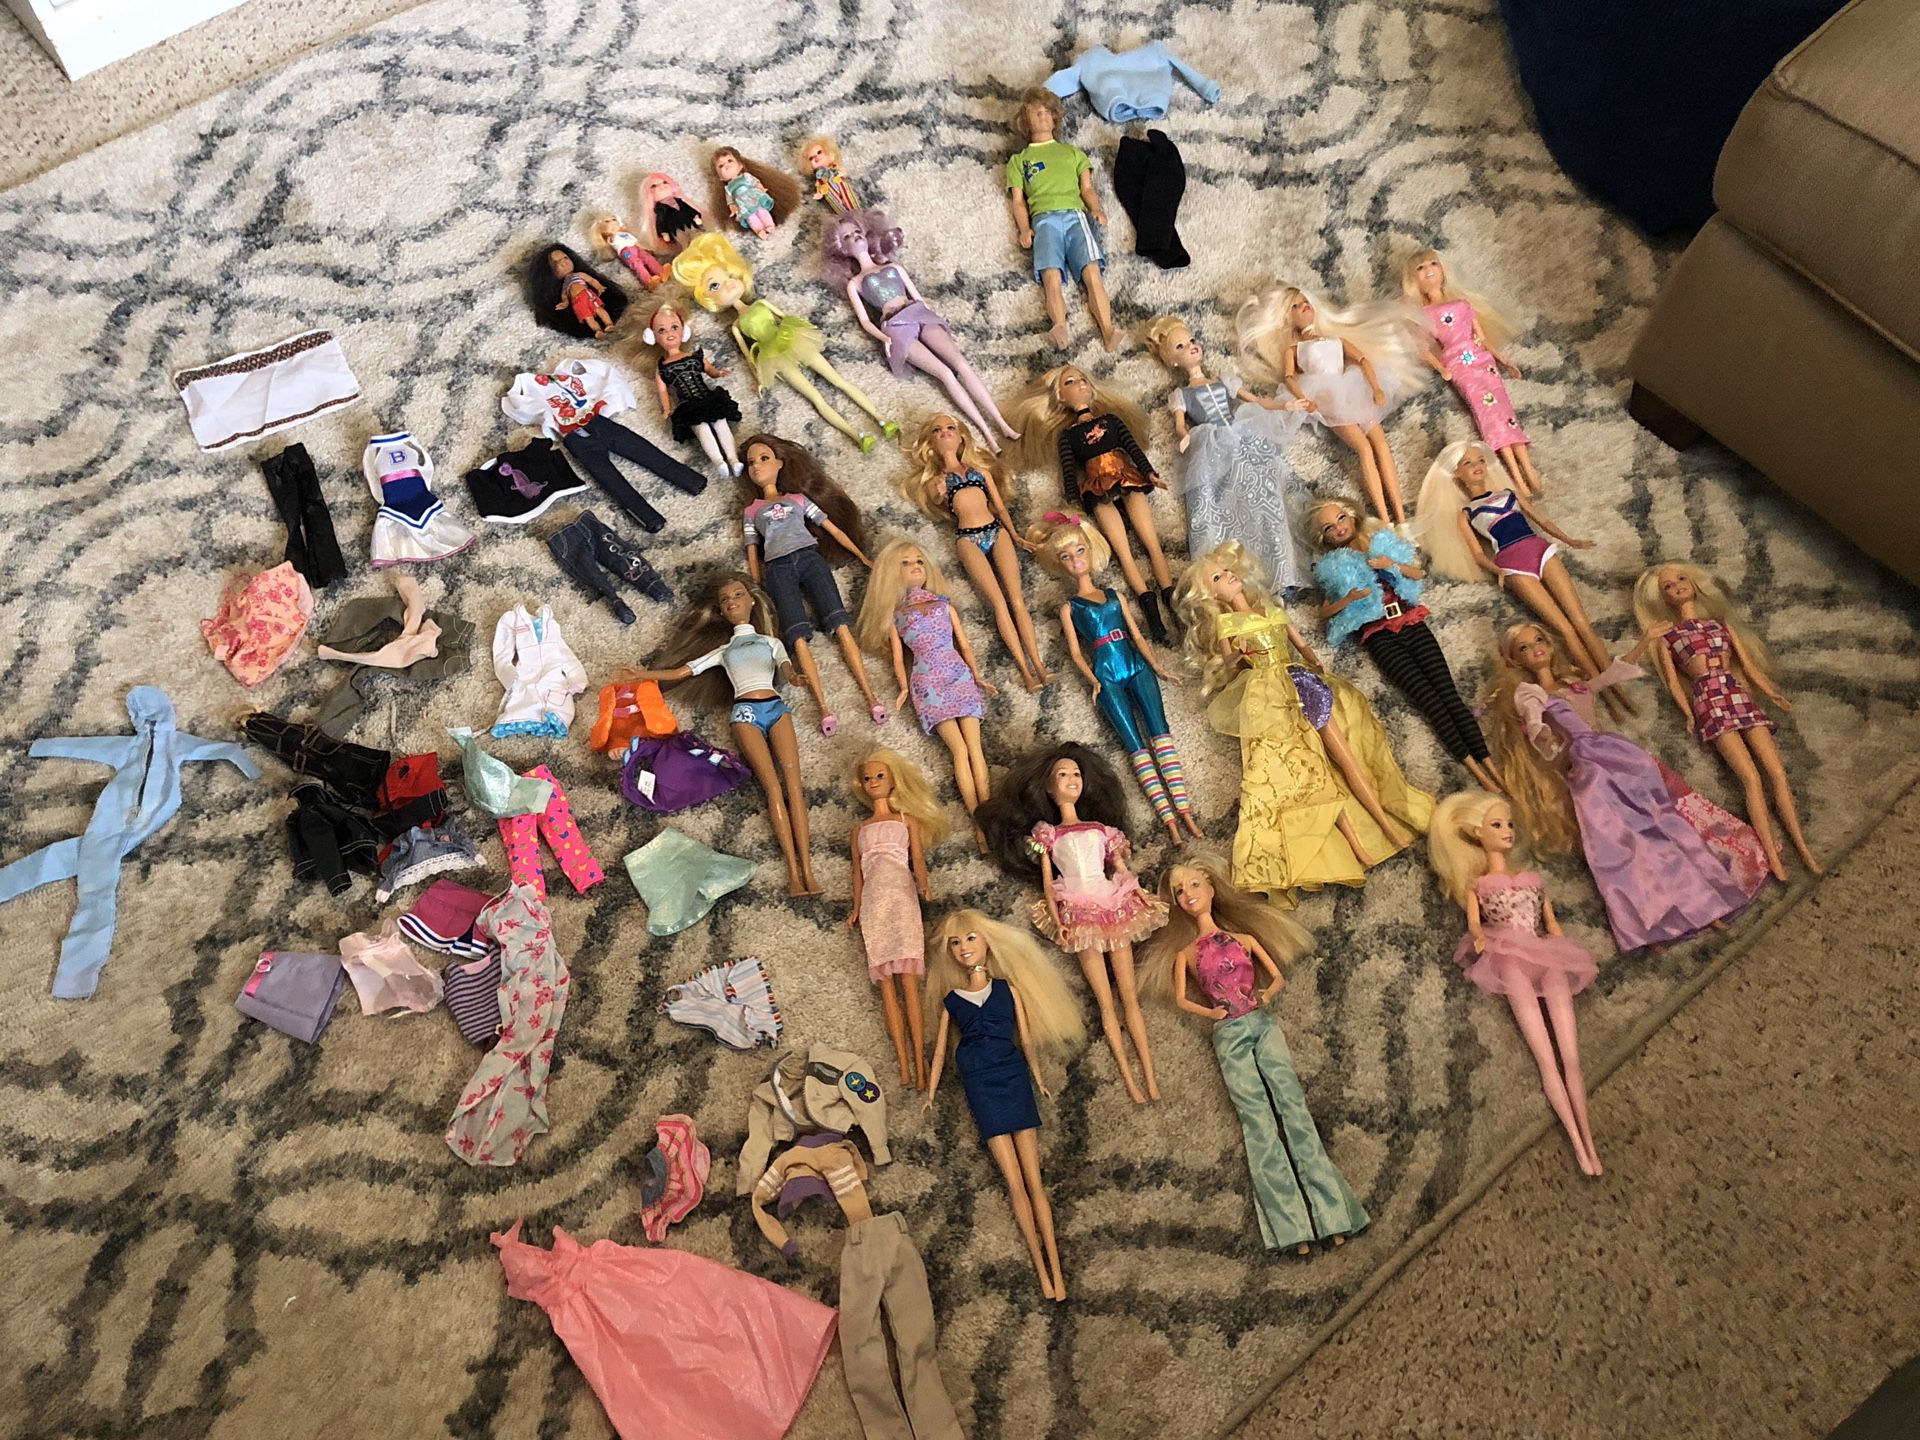 Barbies galore and some extra clothes